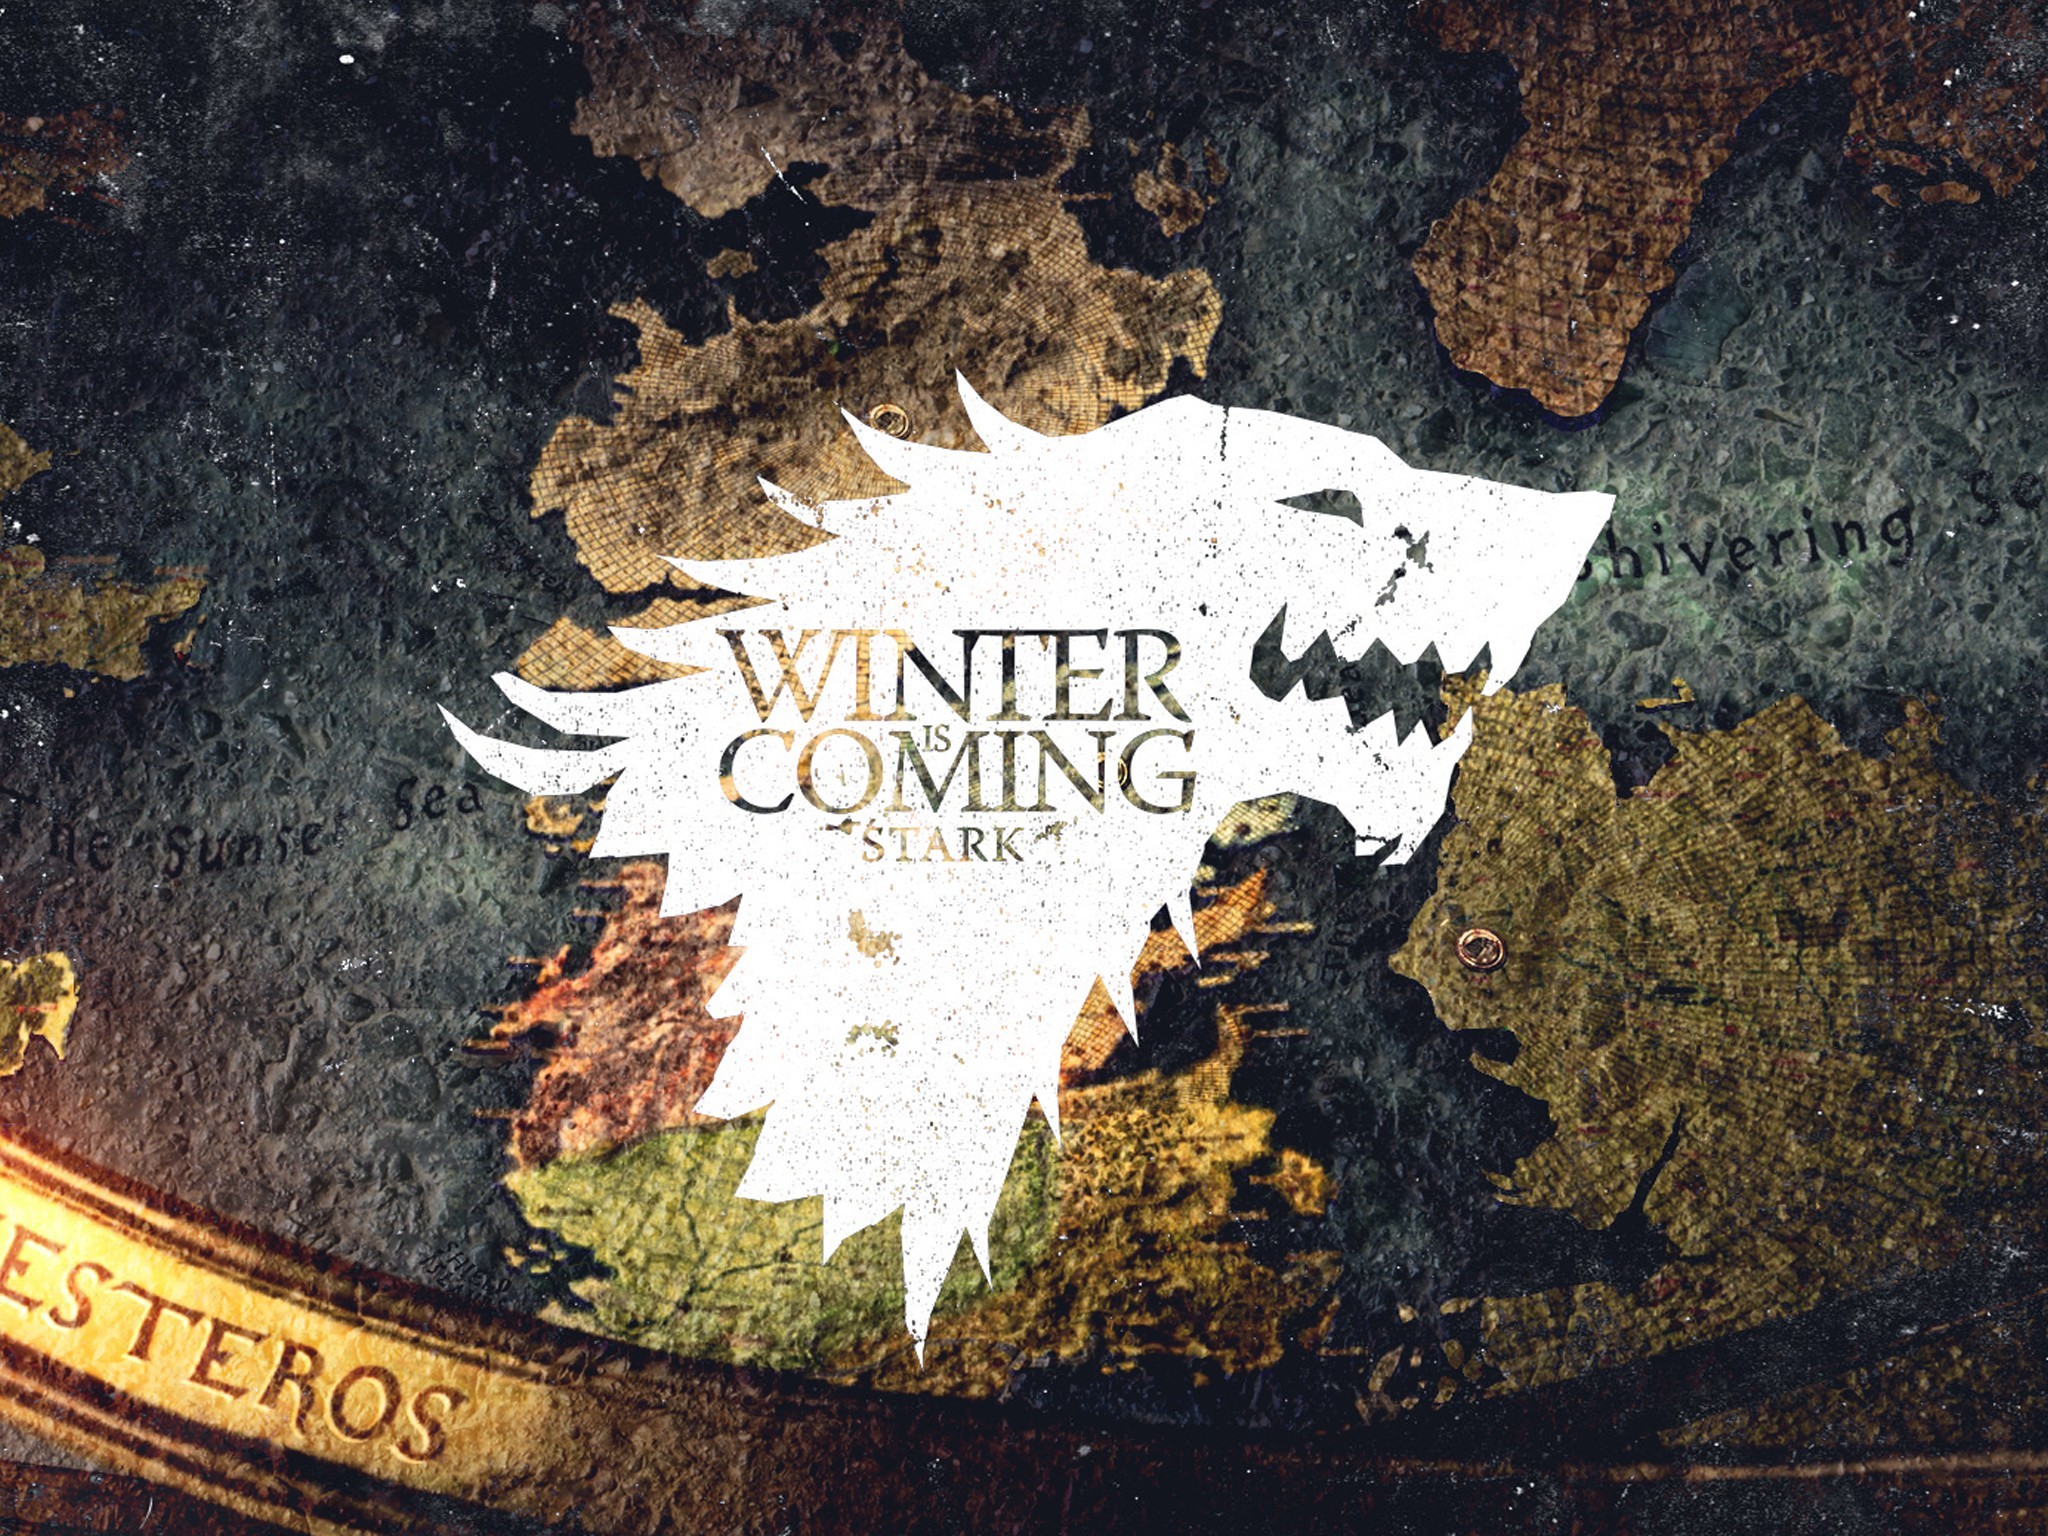 2048x1536 Crest Game of Thrones Winter is Coming direwolf House Stark wolves wallpaper  |  | 218007 | WallpaperUP